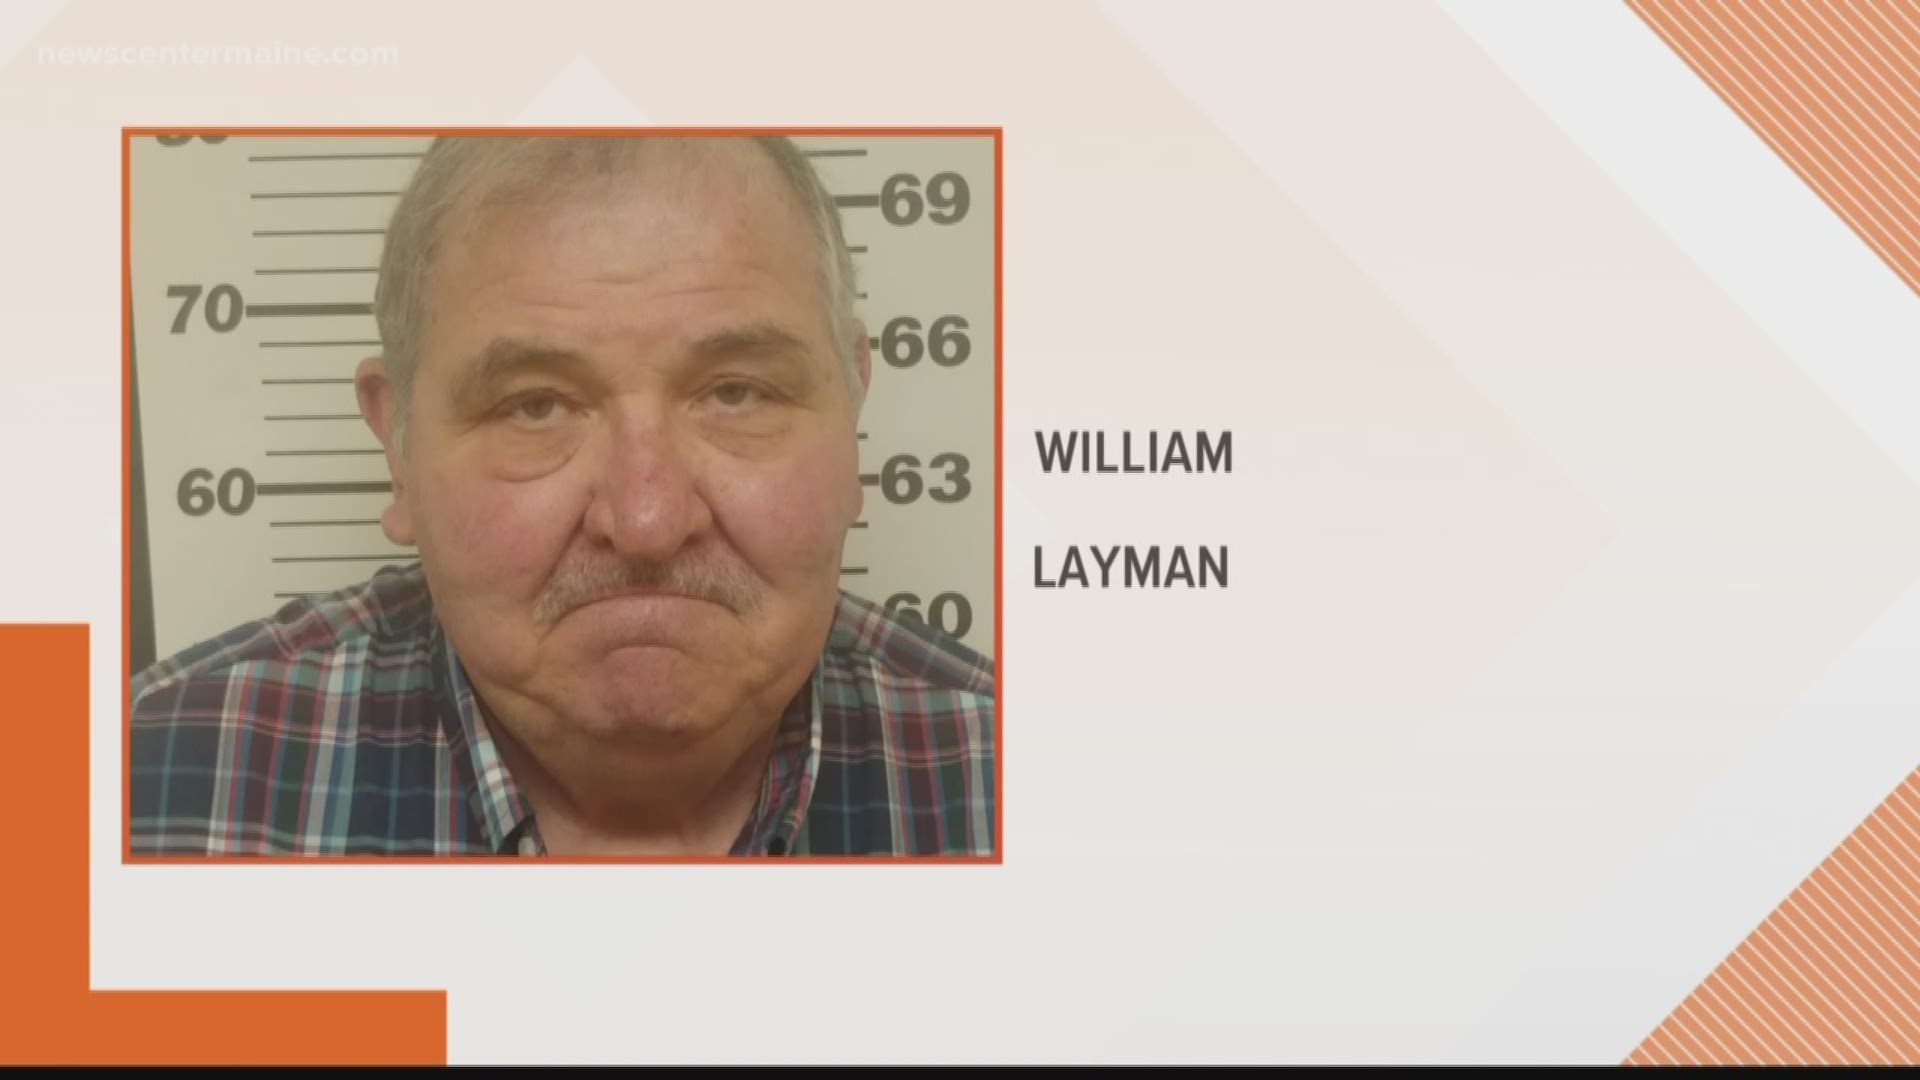 Police say William Layman drove his truck recklessly and, in a manner, which endangered two students by failing to stop for them.